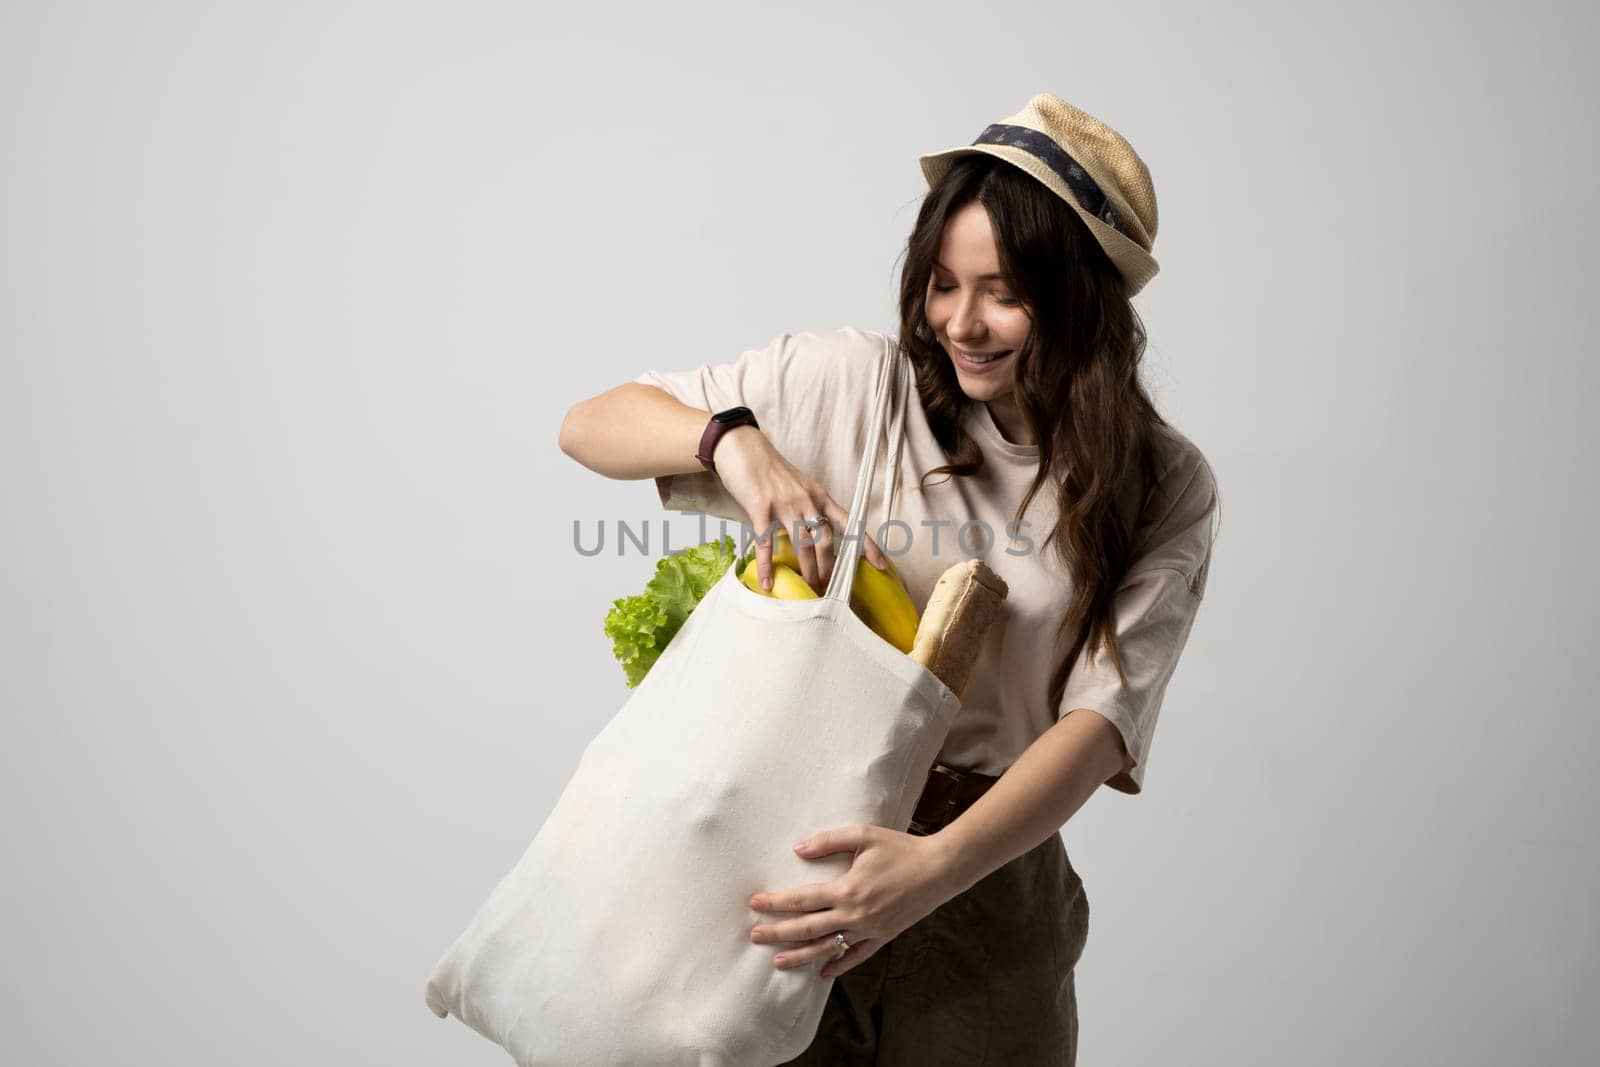 Smiling woman in a t-shirt and a hat holding reusable cotton shopping bag with vegetables, bread and greens. Concept of no plastic, zero waste, plastic free, sustainable lifestyle. by vovsht